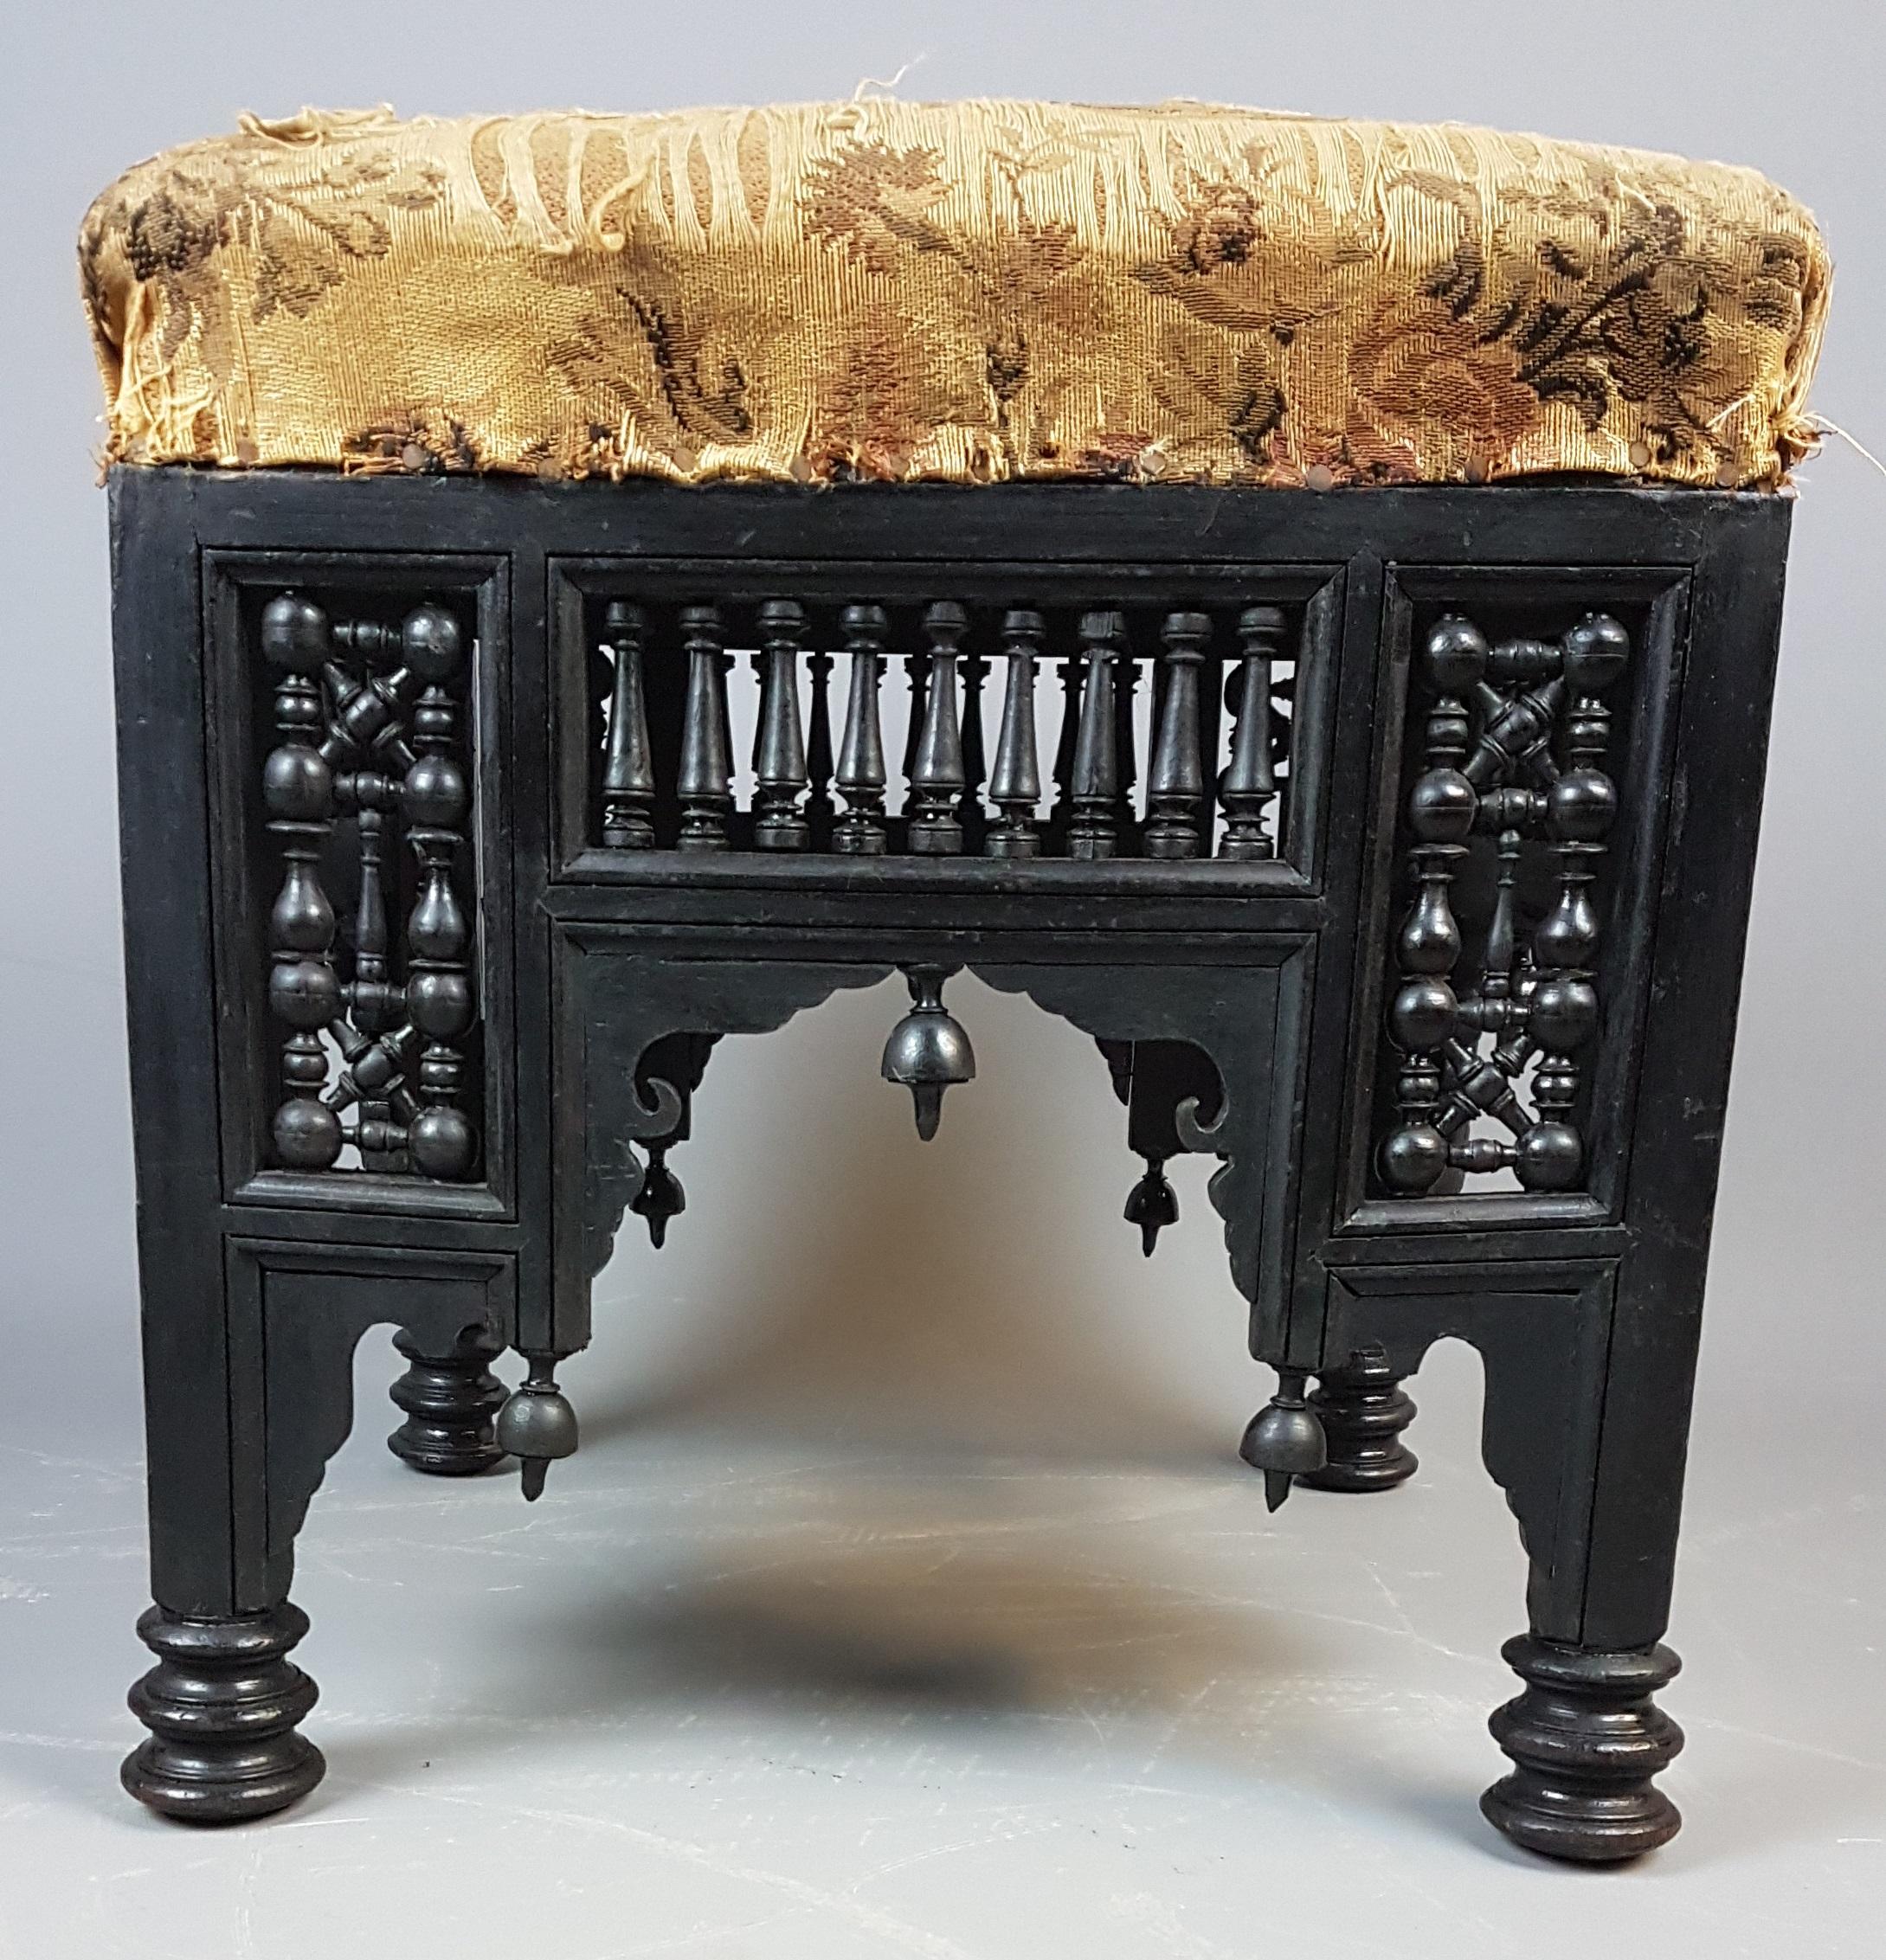 A lovely late 19th century Liberty's Mashrabiya stool with original ebonized finish and original fabric. The designer of this stool is unknown but it was retailed by Liberty's in London and is also in the book 'Liberty's Furniture 1875-1915, The